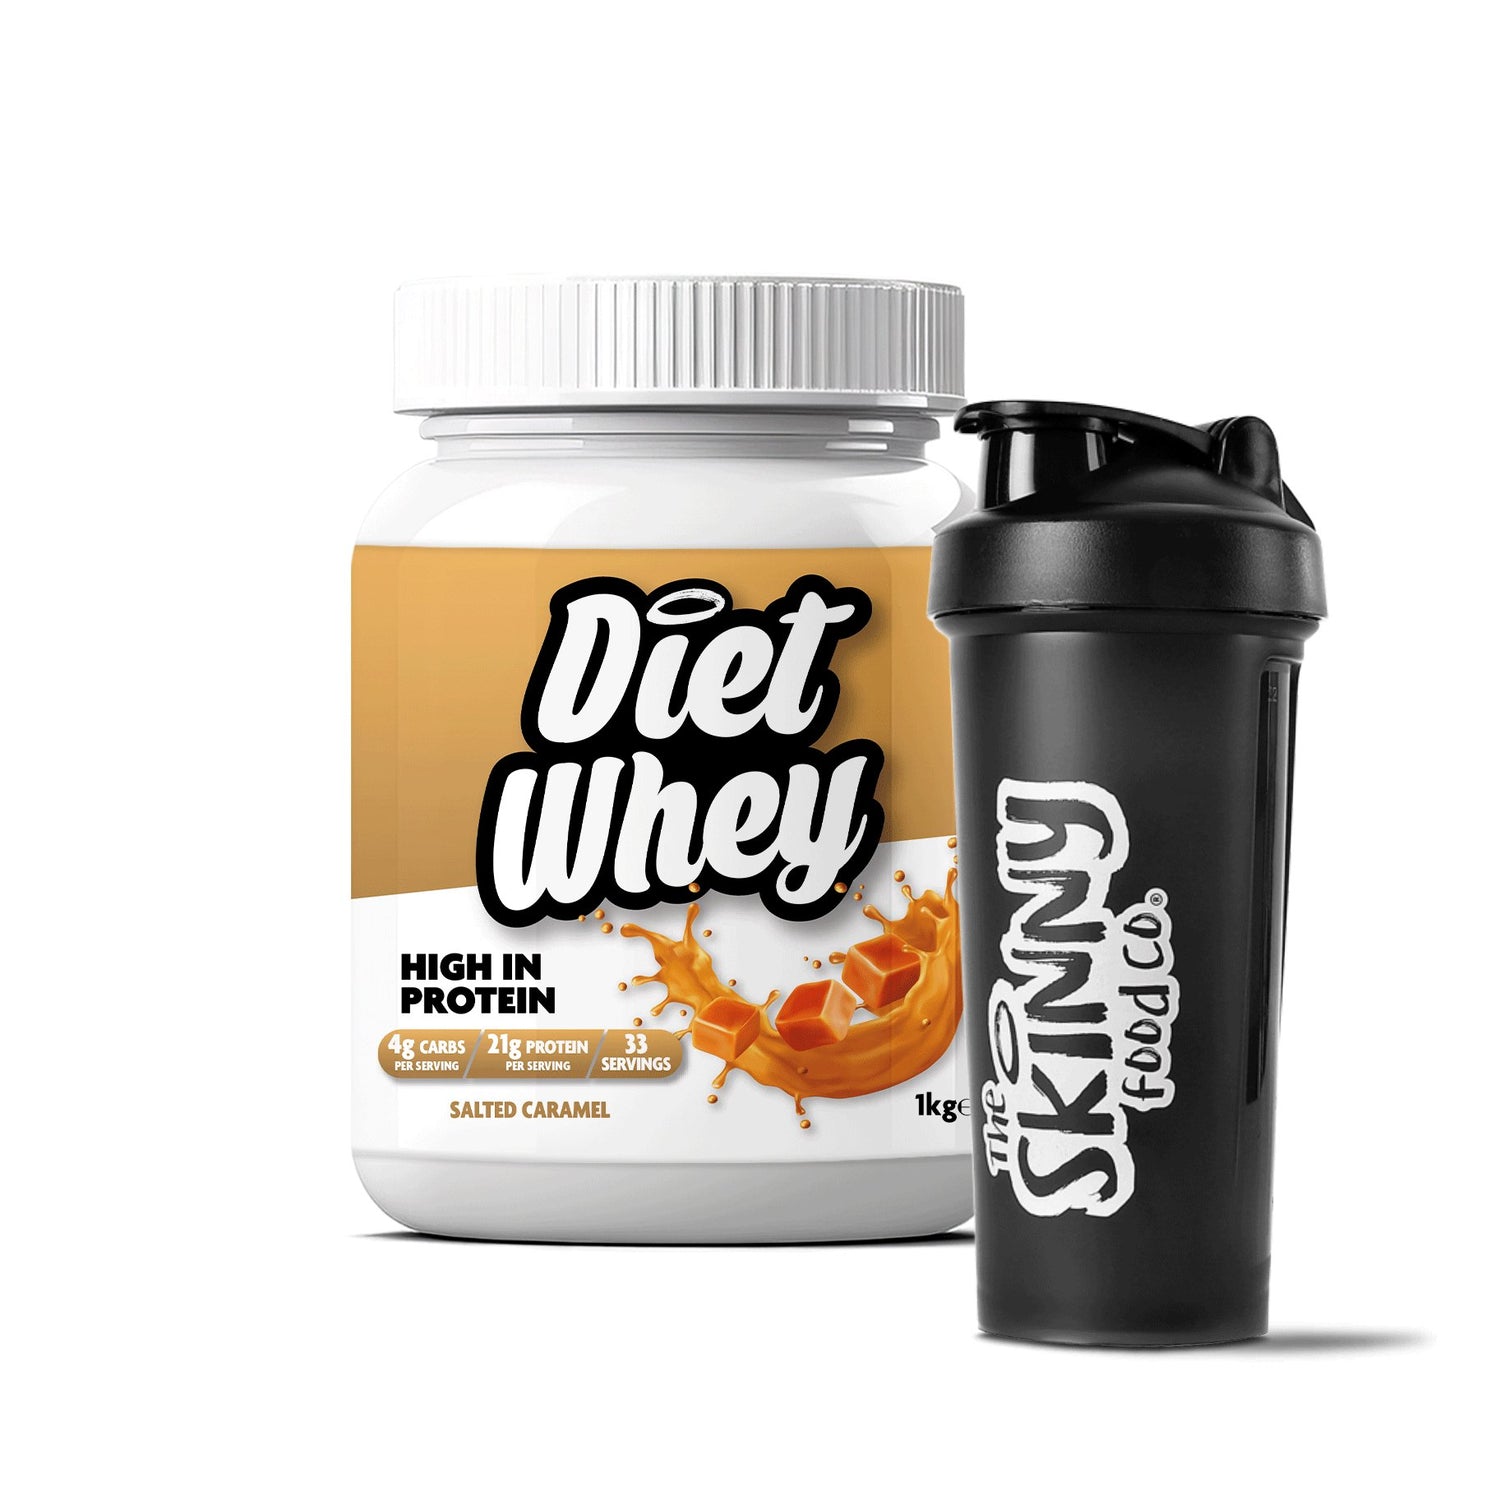 Diet Whey Protein + Free Shaker - Salted Caramel 1kg - 21g protein per serving - theskinnyfoodco